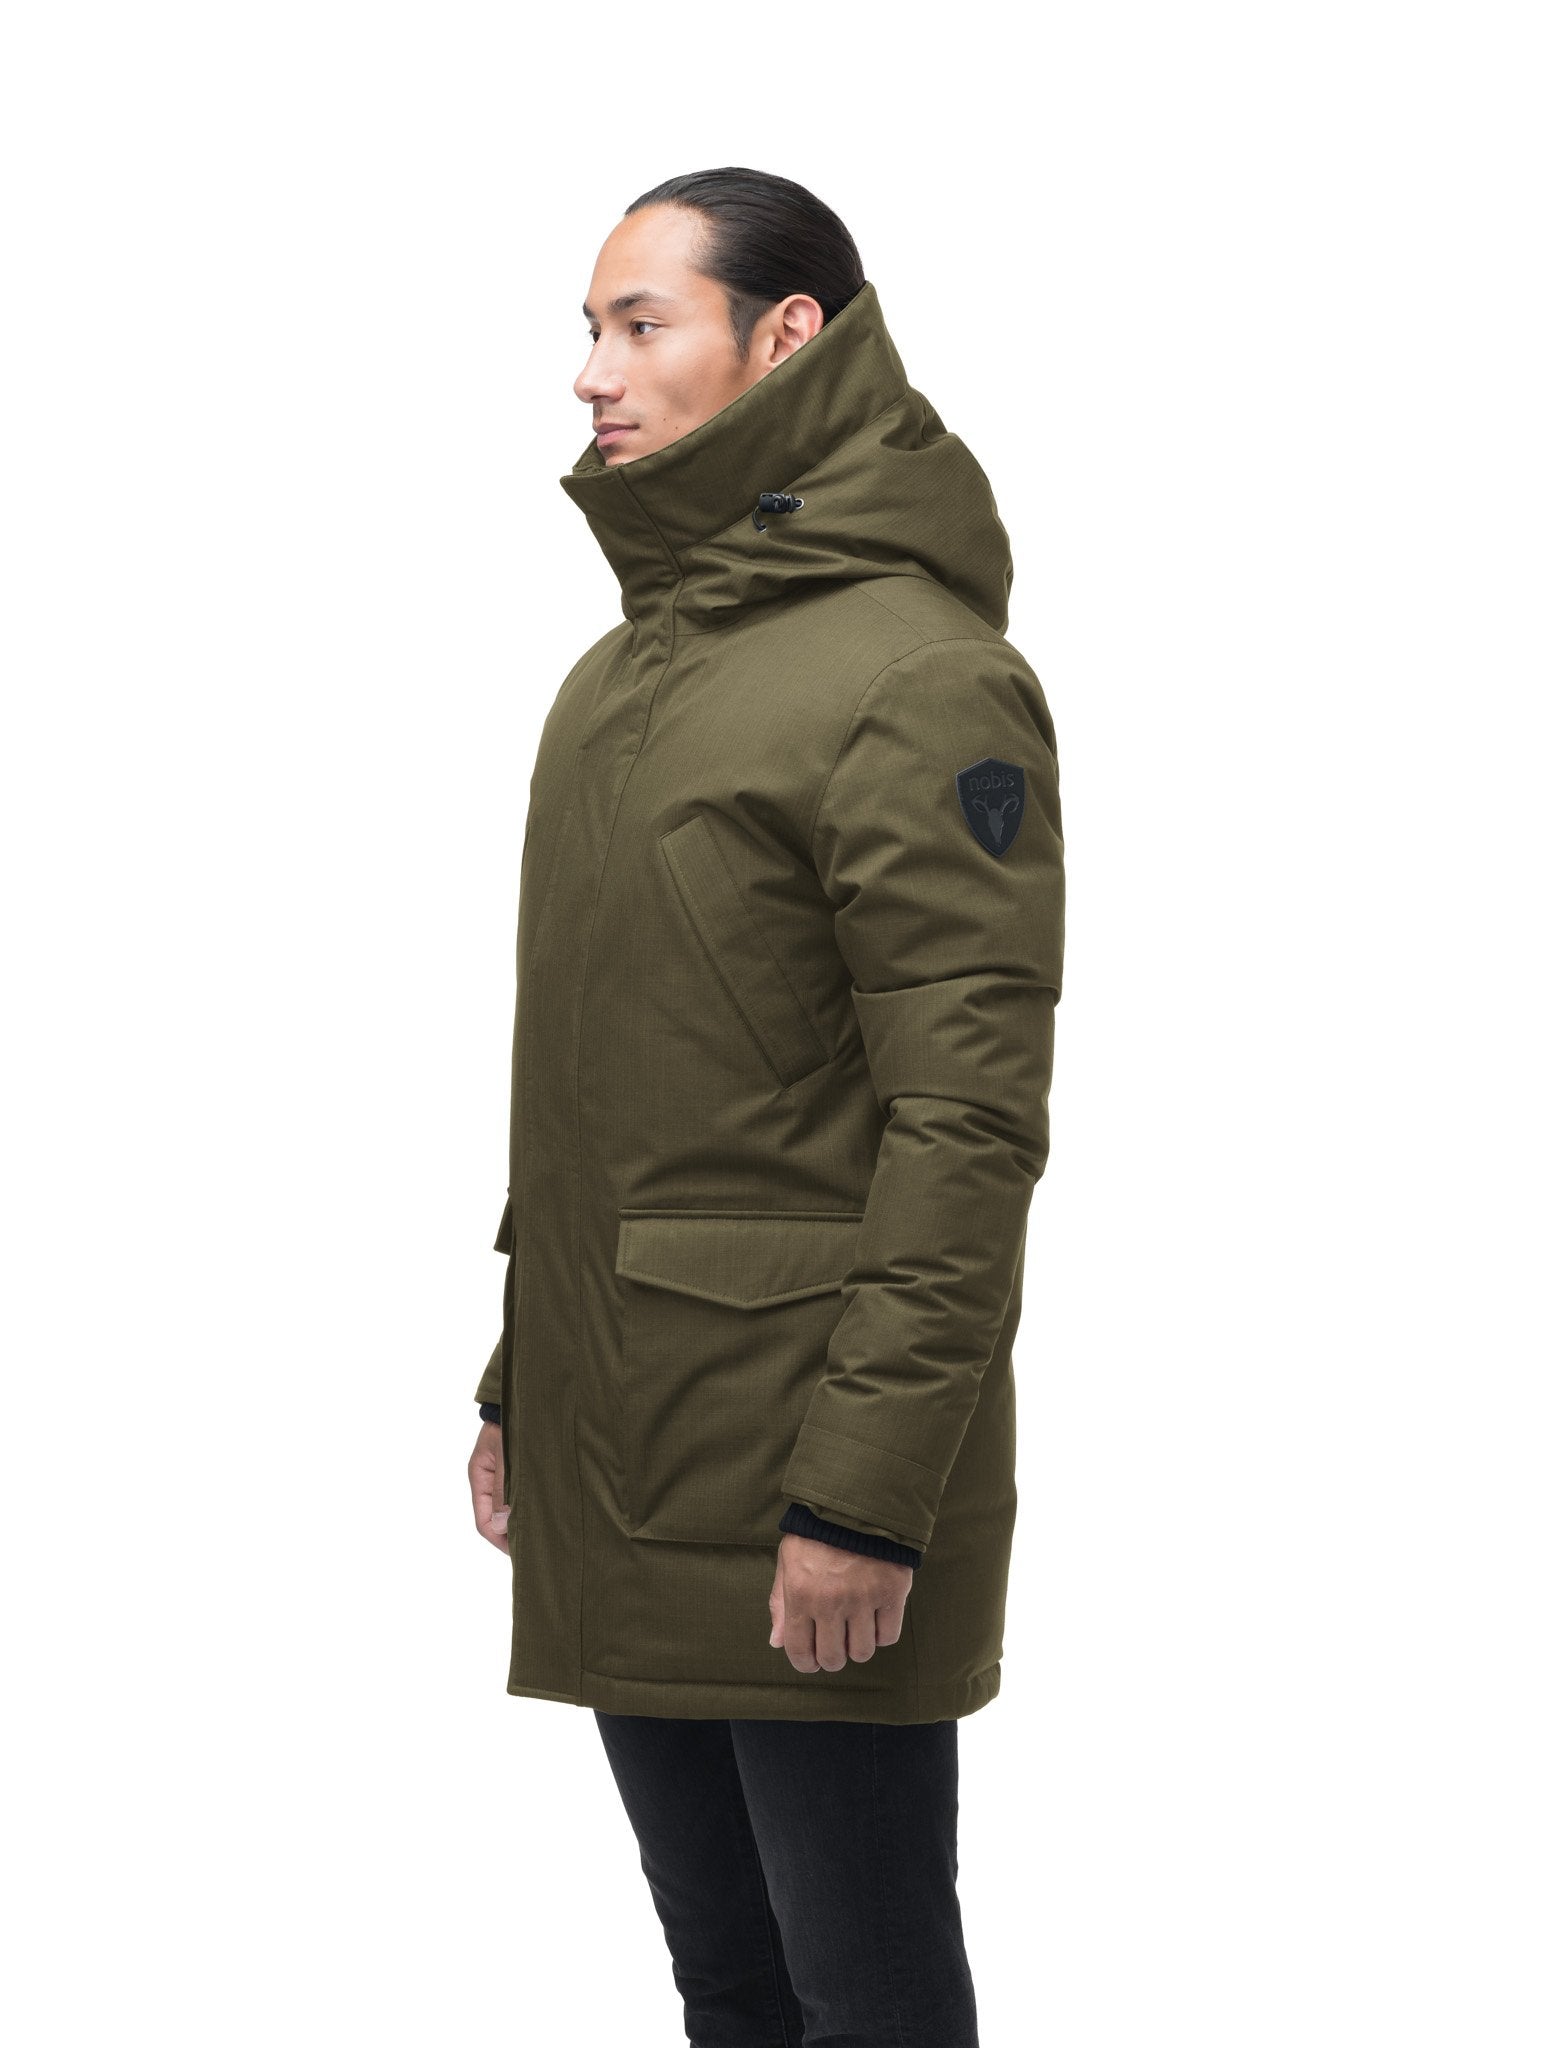 Men's thigh length down-filled parka with non-removable hood in Fatigue